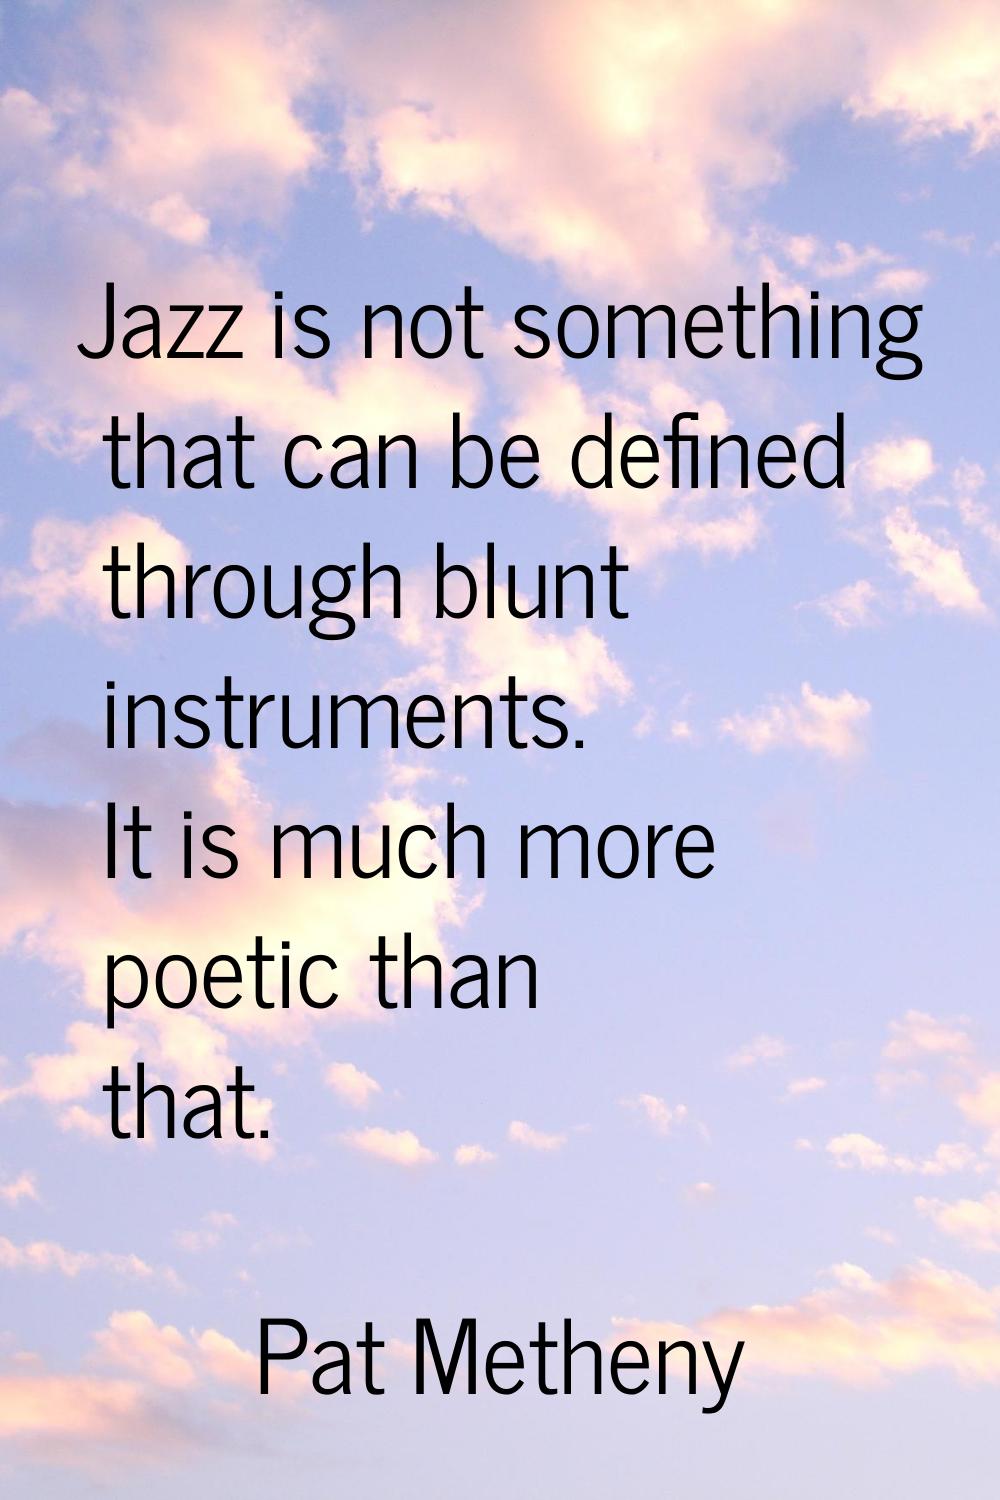 Jazz is not something that can be defined through blunt instruments. It is much more poetic than th